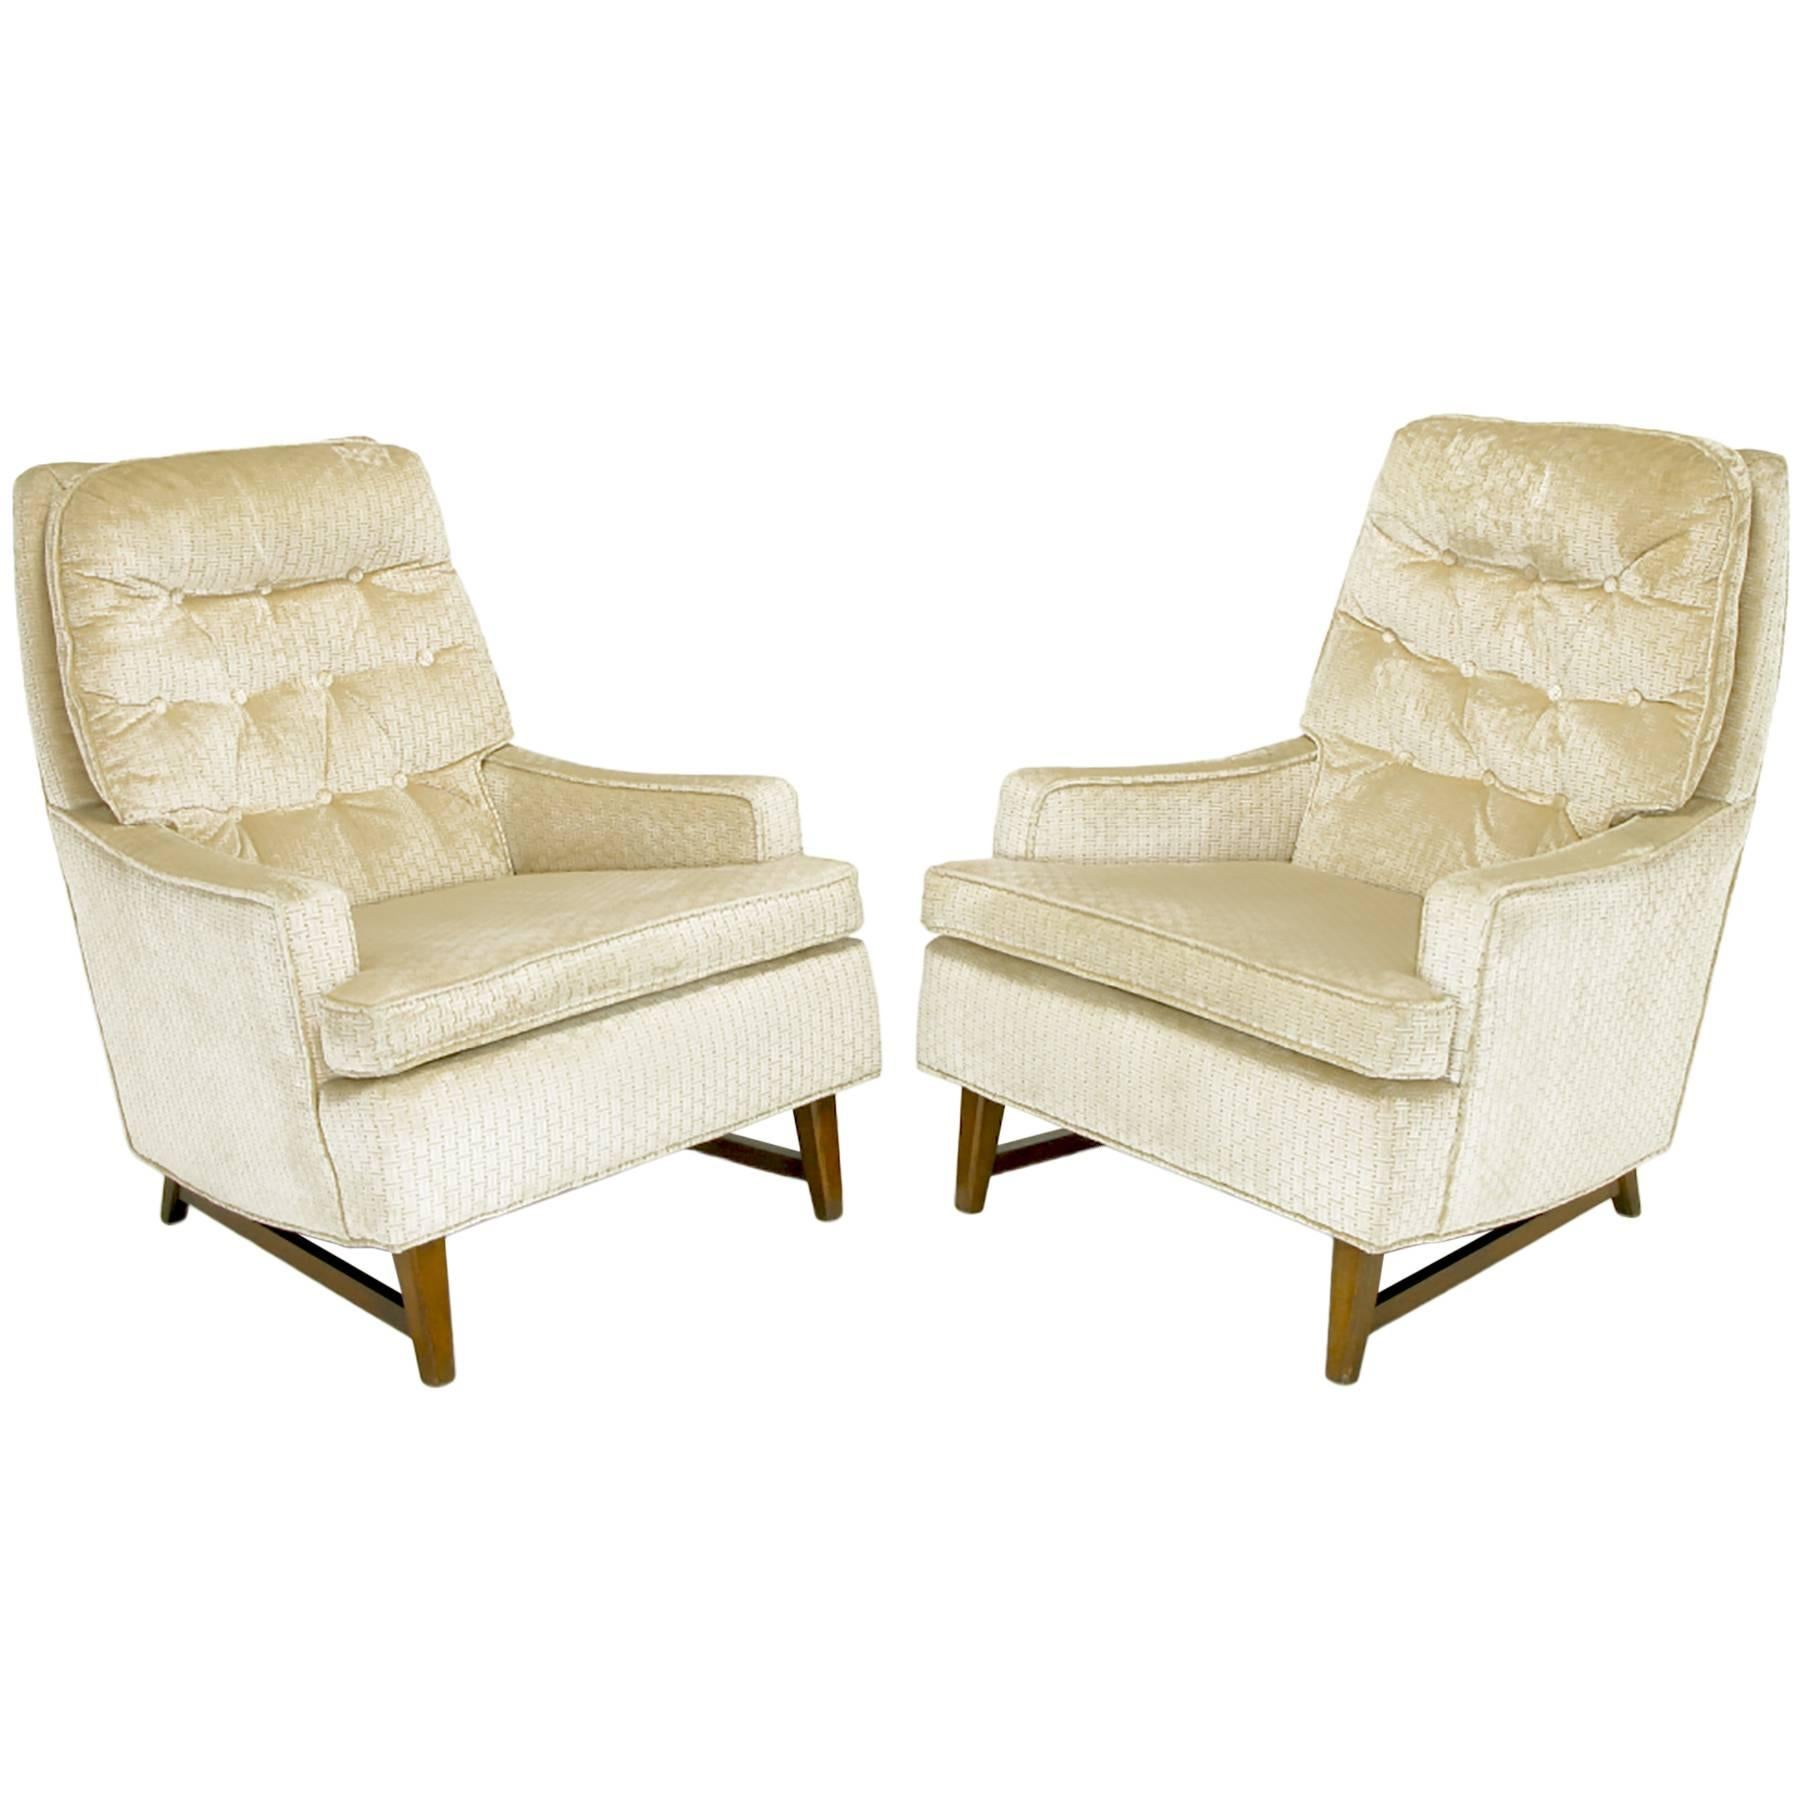 Pair of 1960s High Back Ivory Cut Velvet Lounge Chairs after Harvey Probber